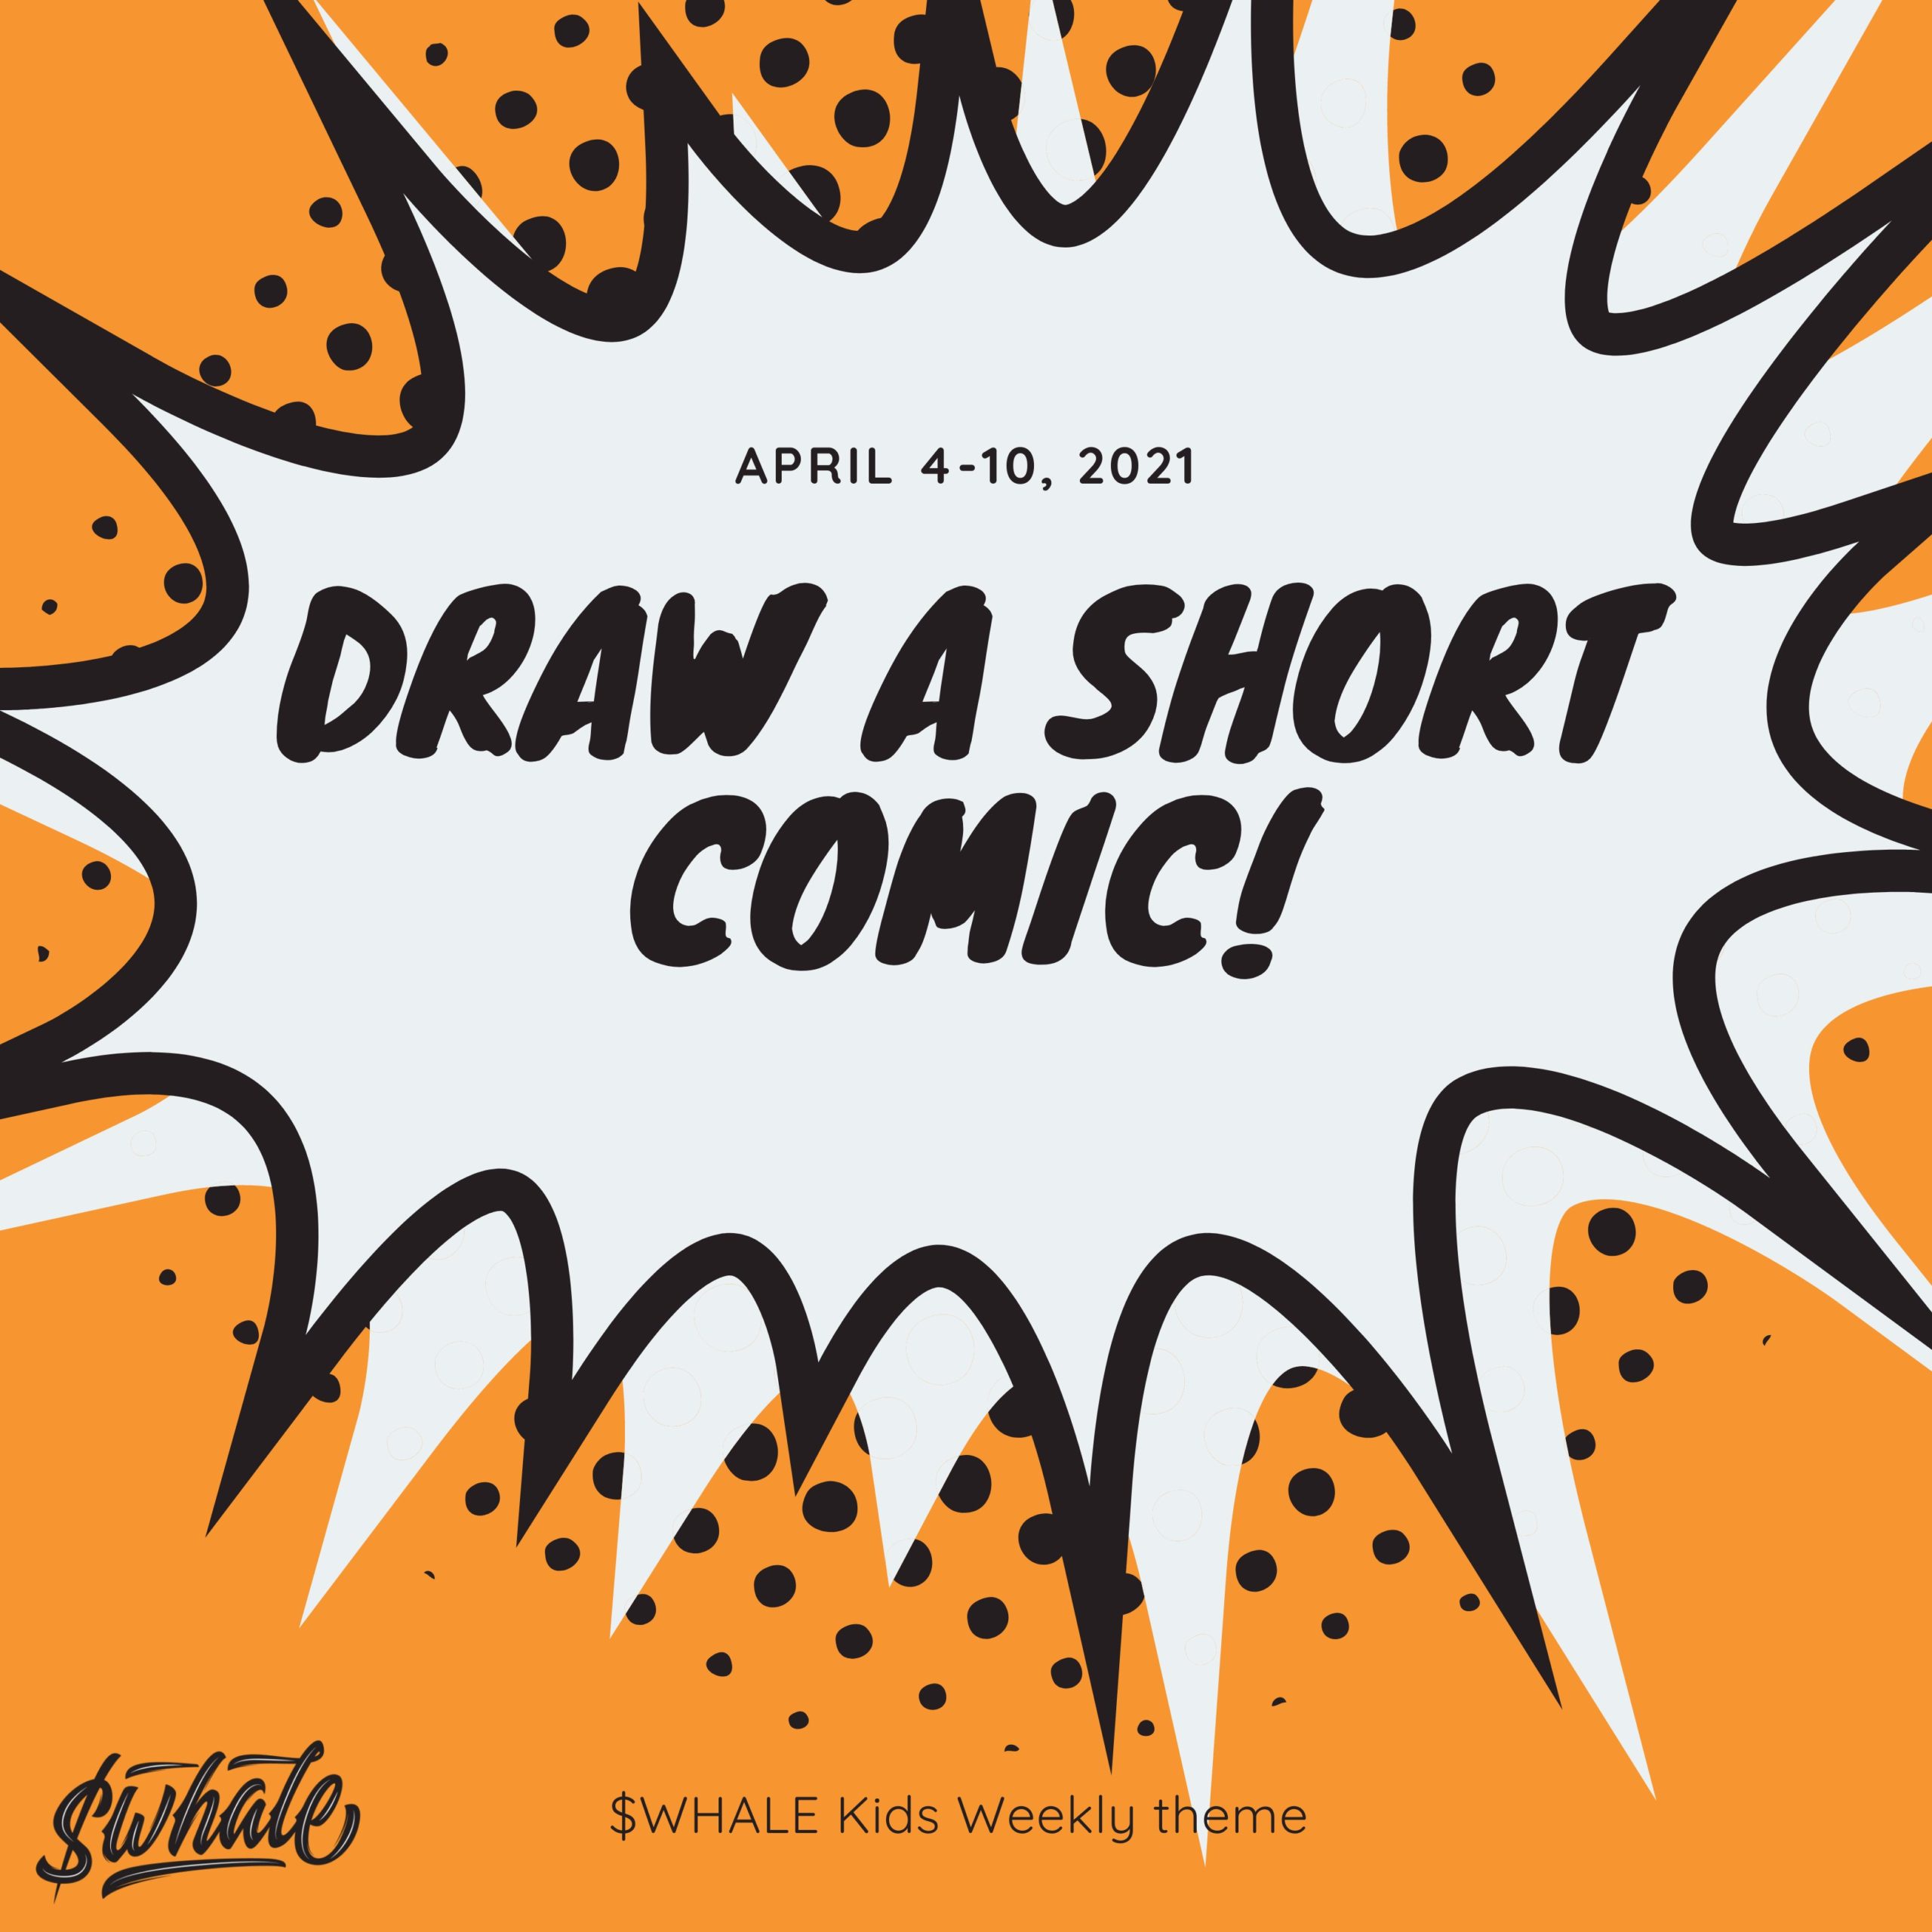 "Draw a short comic" by Whale Community